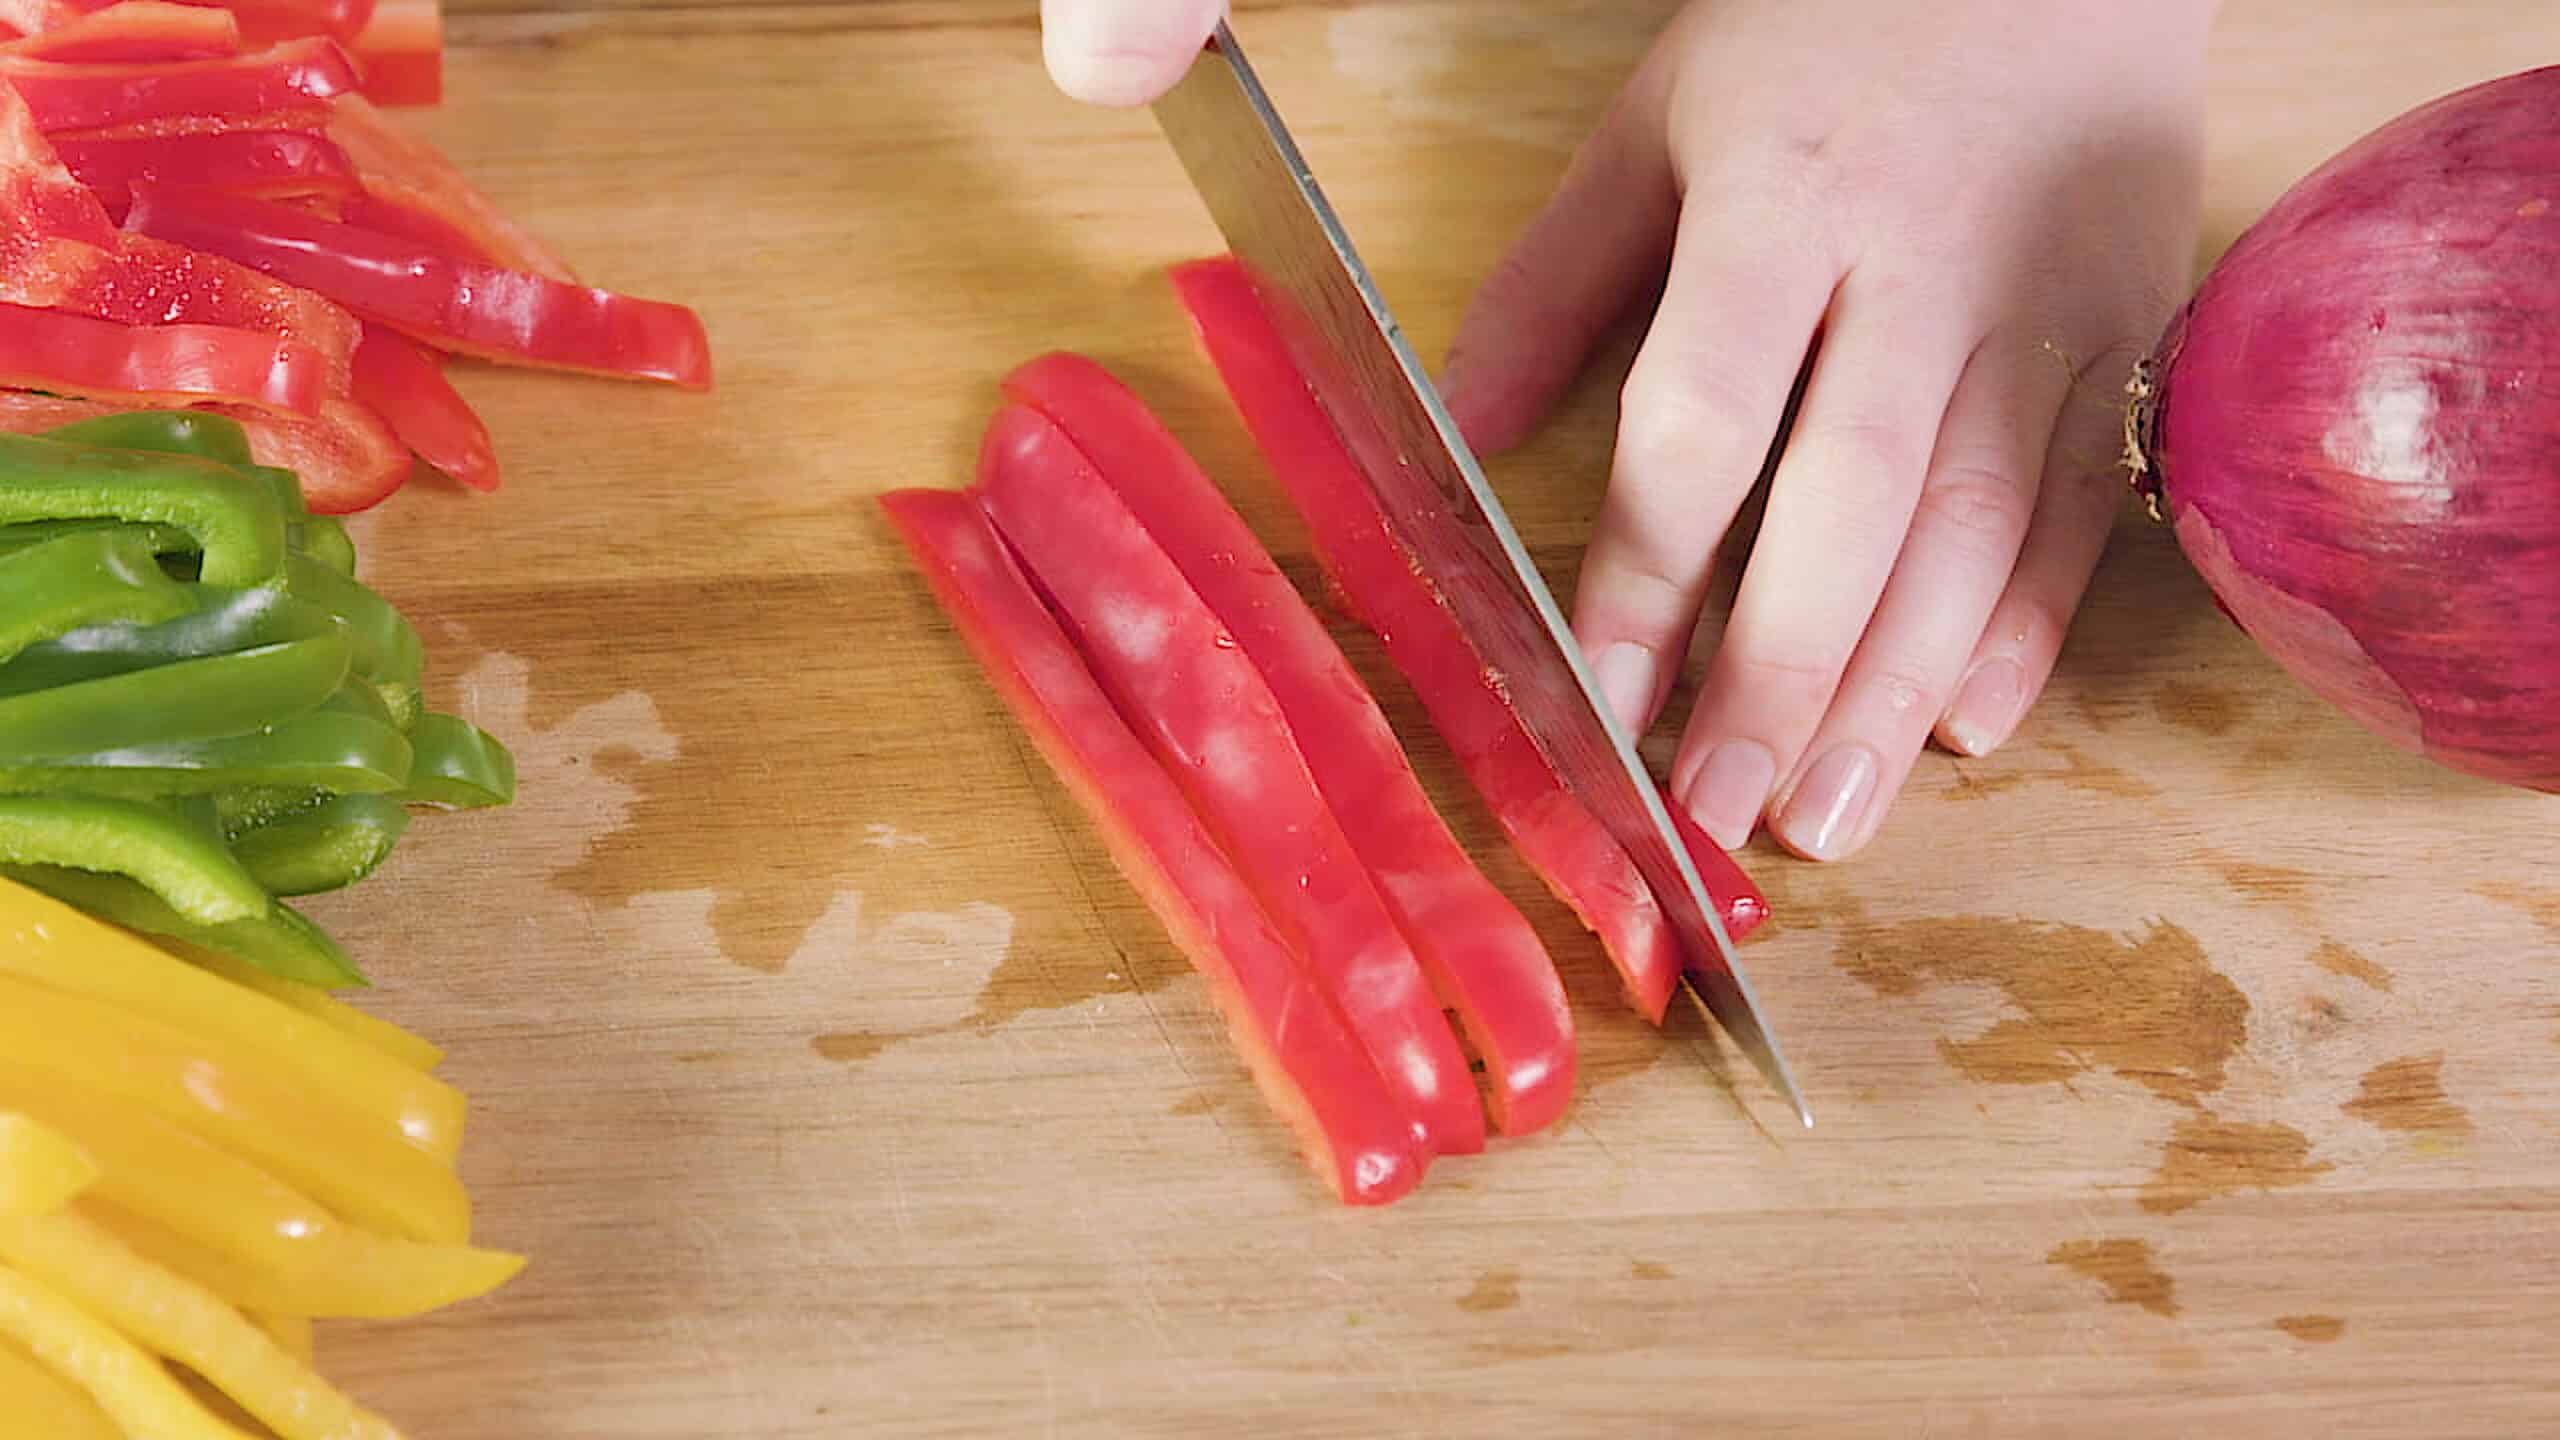 Close-up view of a wooden cutting board with red peppers being sliced by hand with a metal kitchen knife framed by sliced red, yellow, and green peppers and a whole red onion.